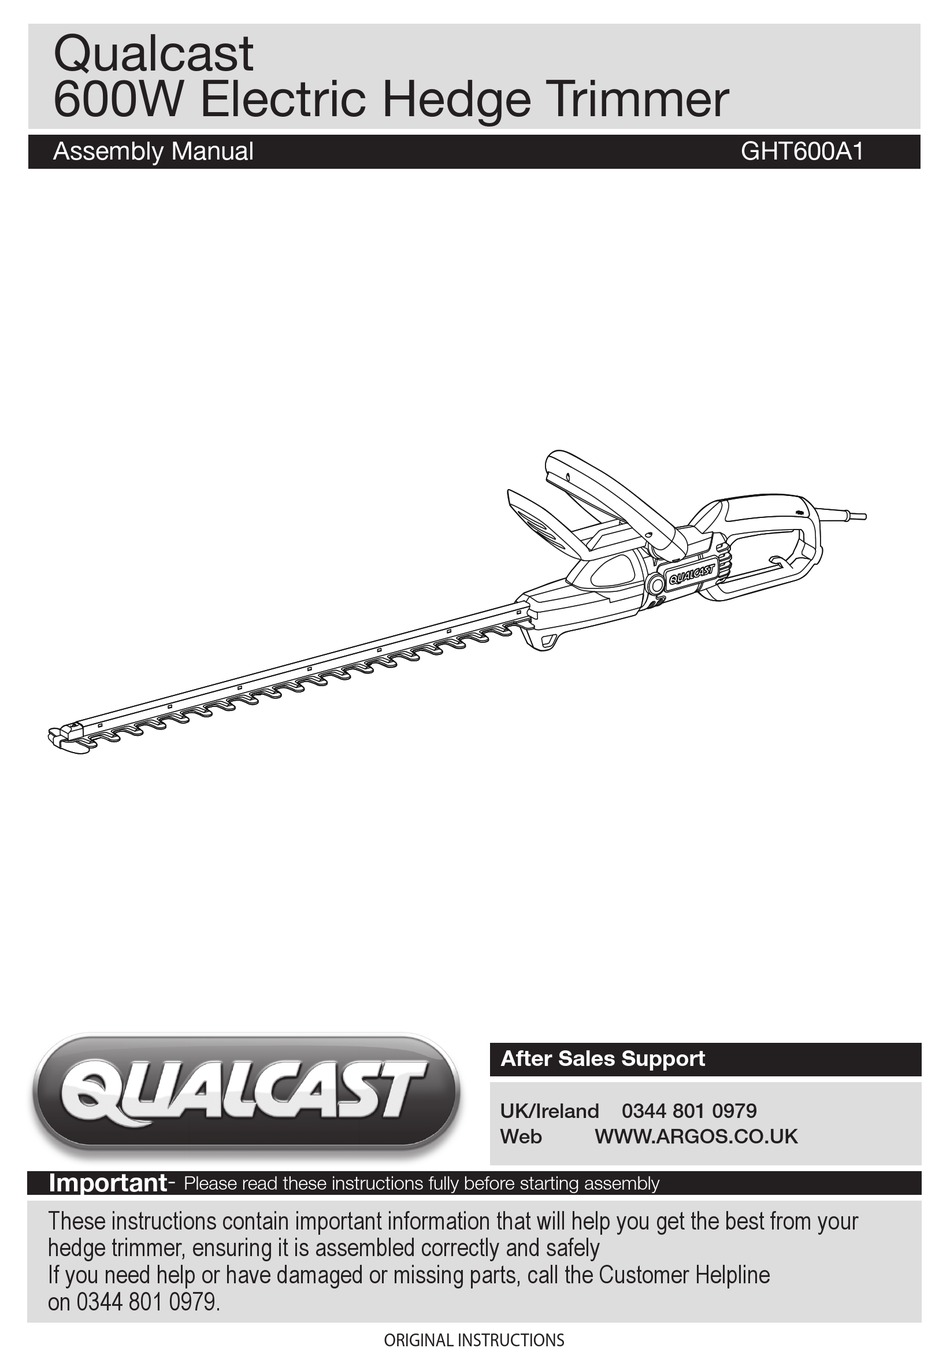 600W. Qualcast Electric Hedge Trimmer